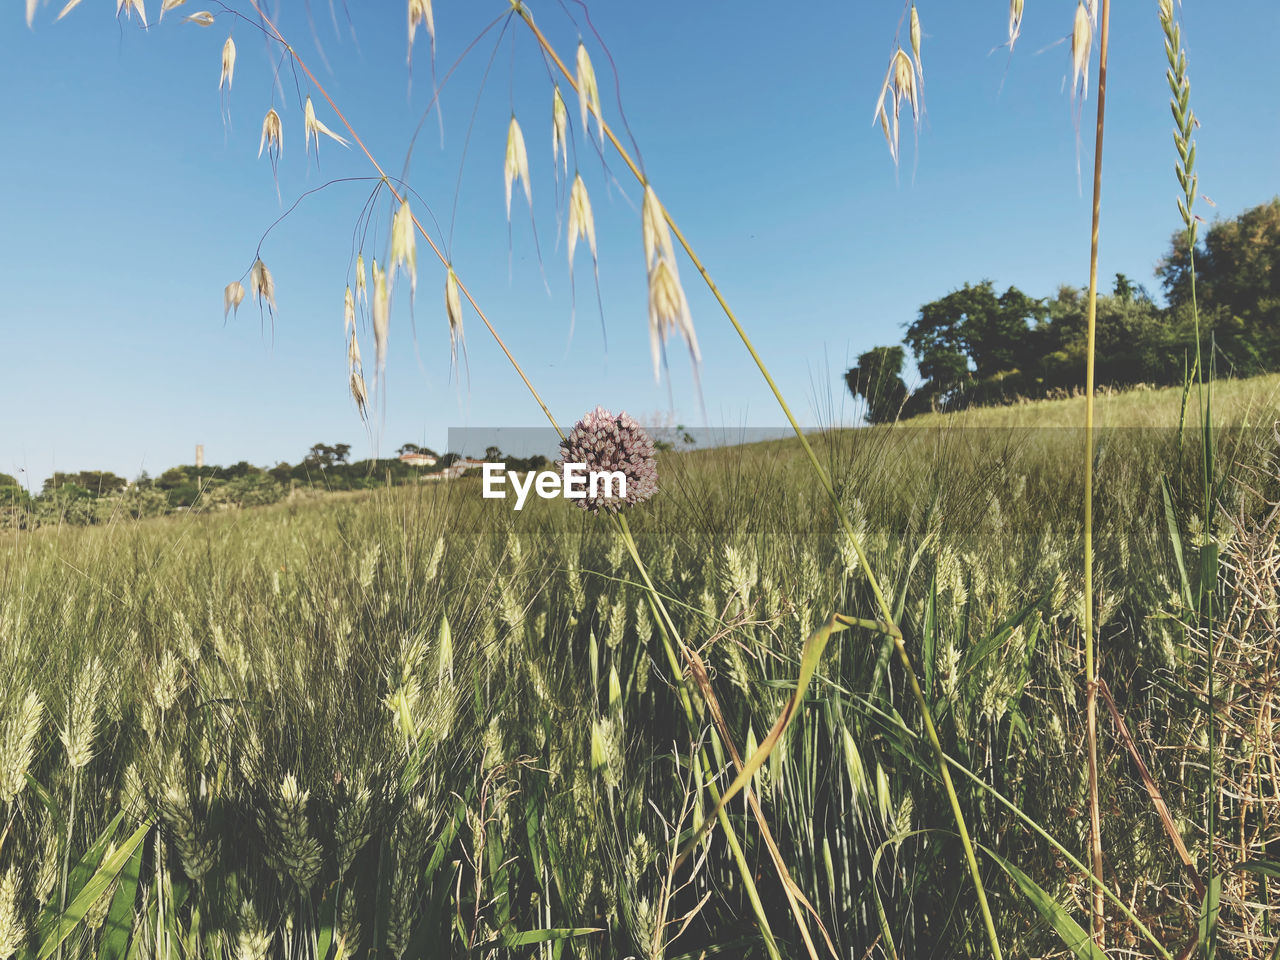 plant, sky, crop, field, landscape, agriculture, land, cereal plant, rural scene, food, growth, nature, food grain, grass, wheat, environment, cereal, corn, farm, prairie, no people, blue, rye, beauty in nature, day, tranquility, food and drink, triticale, rural area, scenics - nature, outdoors, barley, clear sky, tranquil scene, emmer, cloud, hordeum, meadow, sunlight, grassland, summer